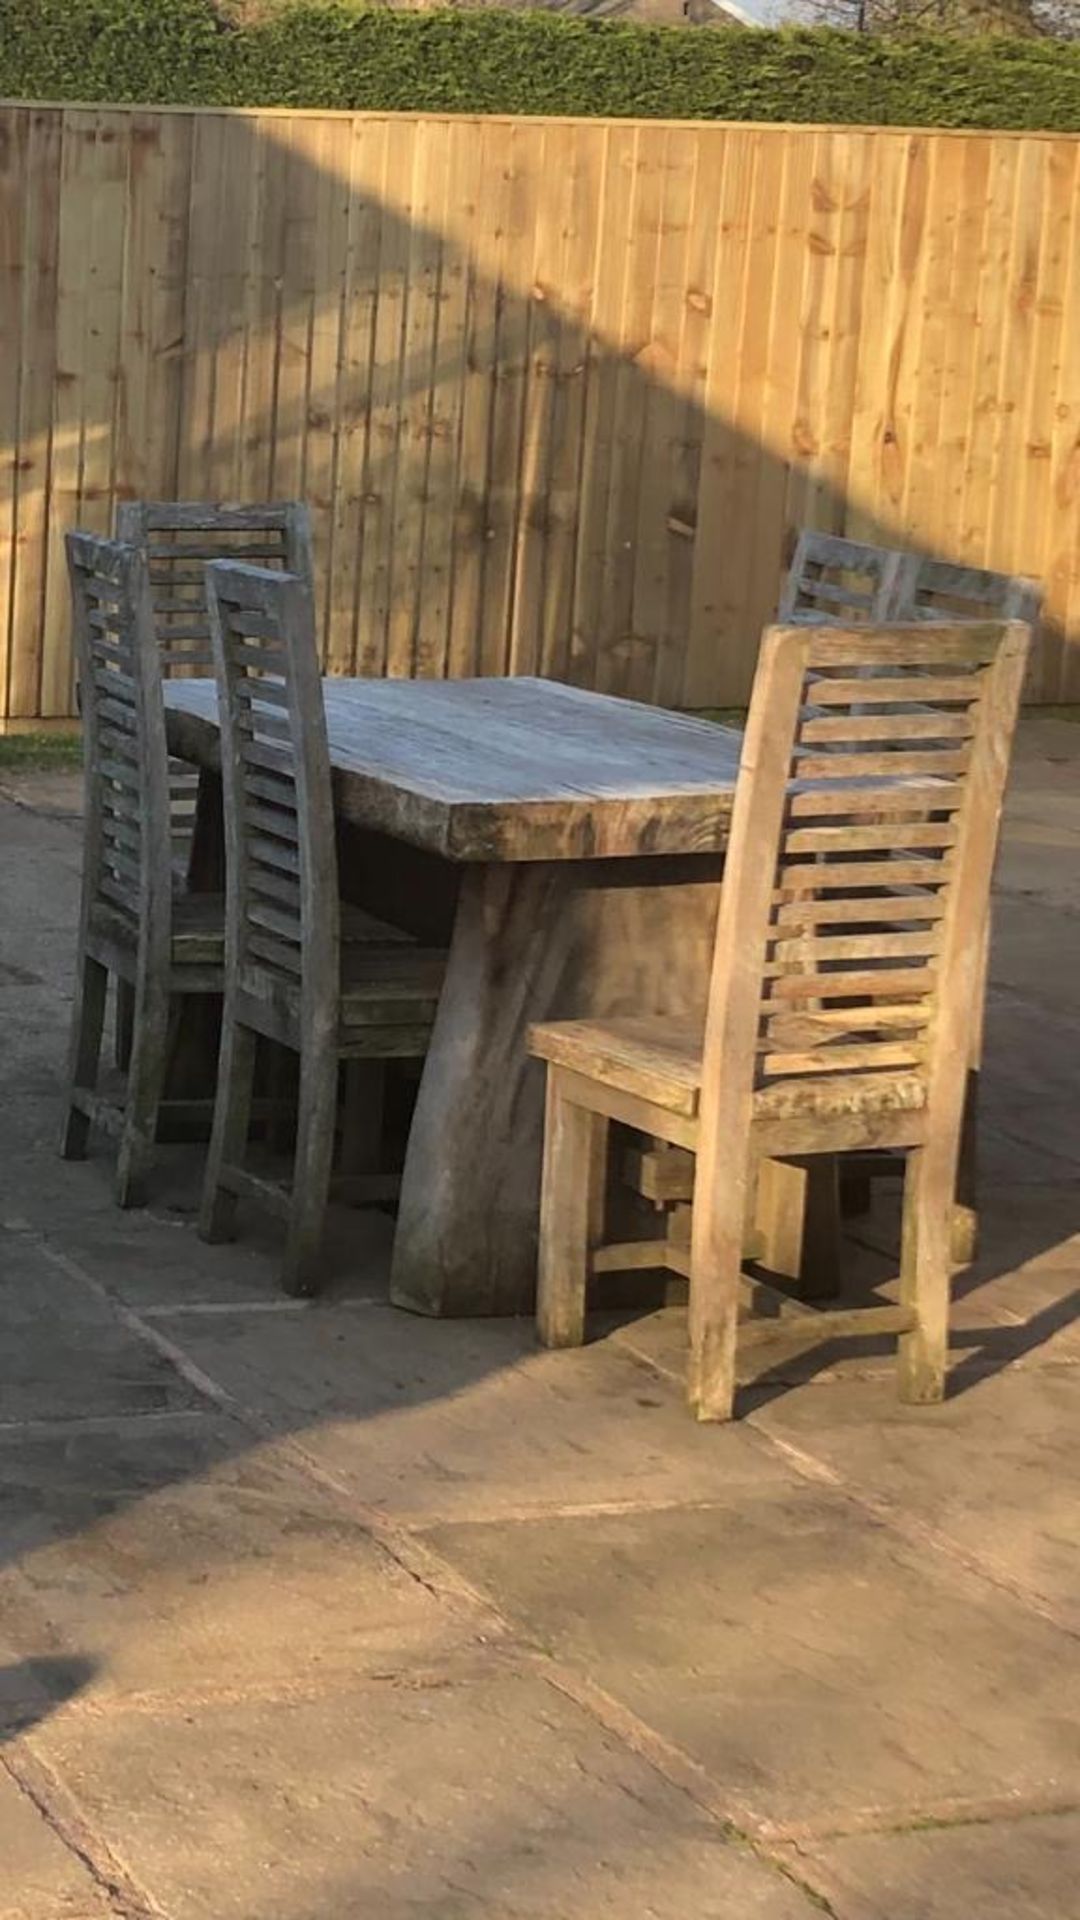 QUALITY LIVE EDGE NEW SUARWOOD HEAVY DUTY SOLID STRONG OUTDOOR TABLE AND 6 CHAIRS